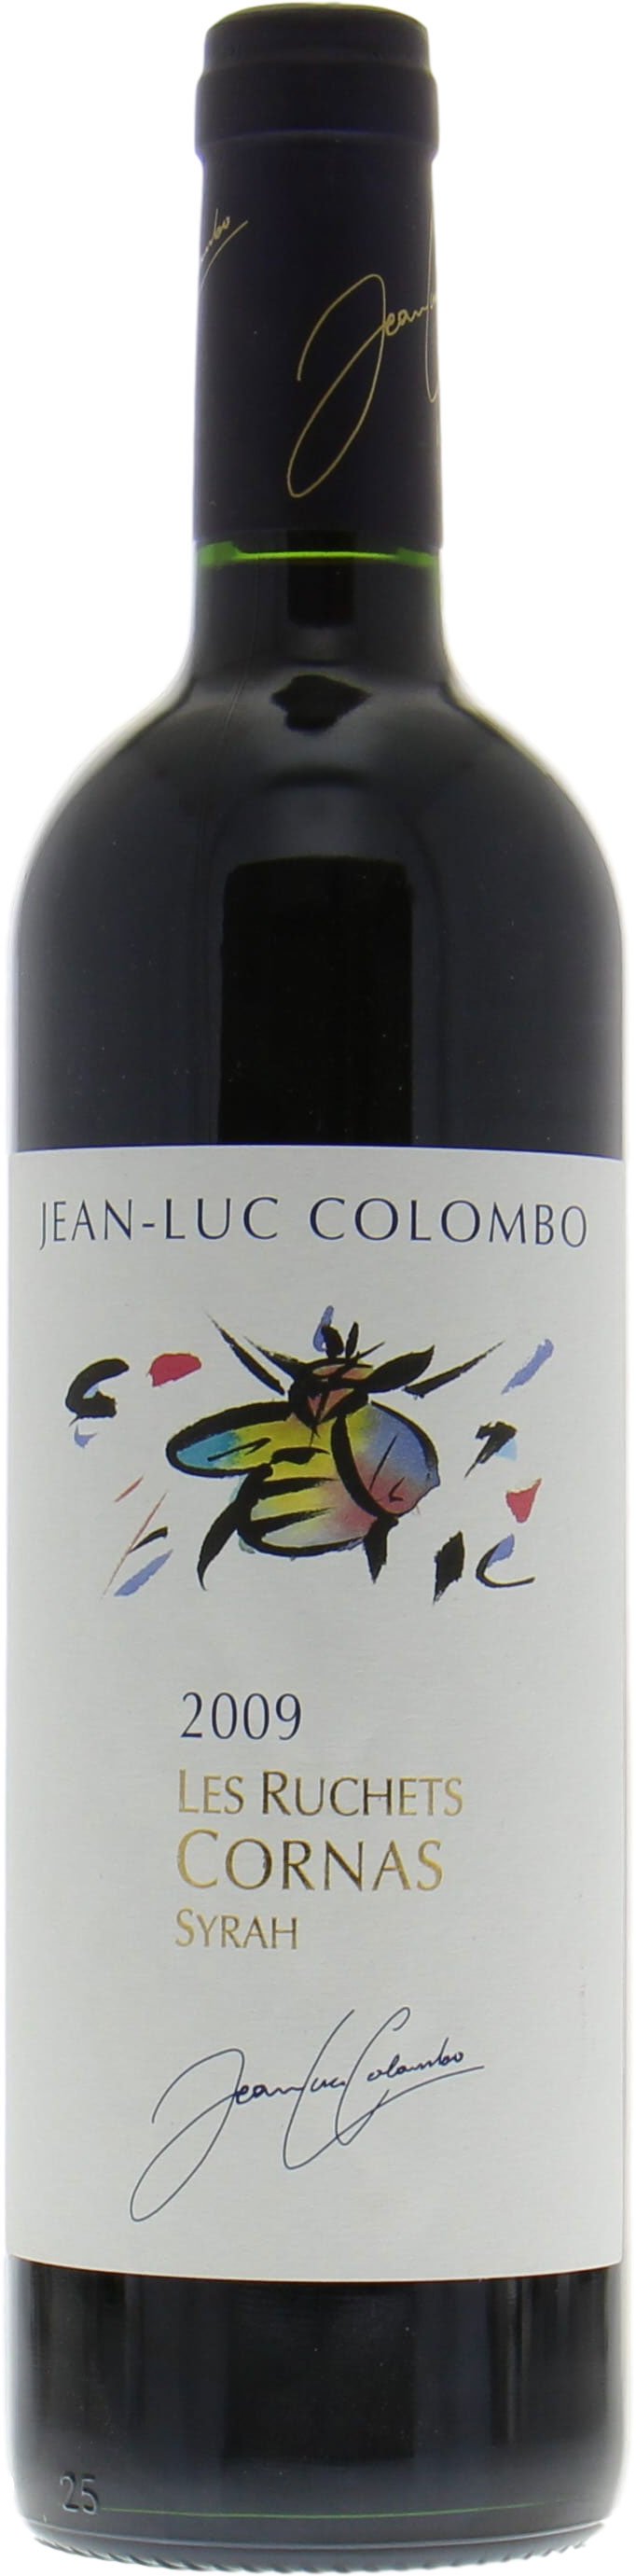 Jean-Luc Colombo - Cornas Ruchets 2009 From Original Wooden Case